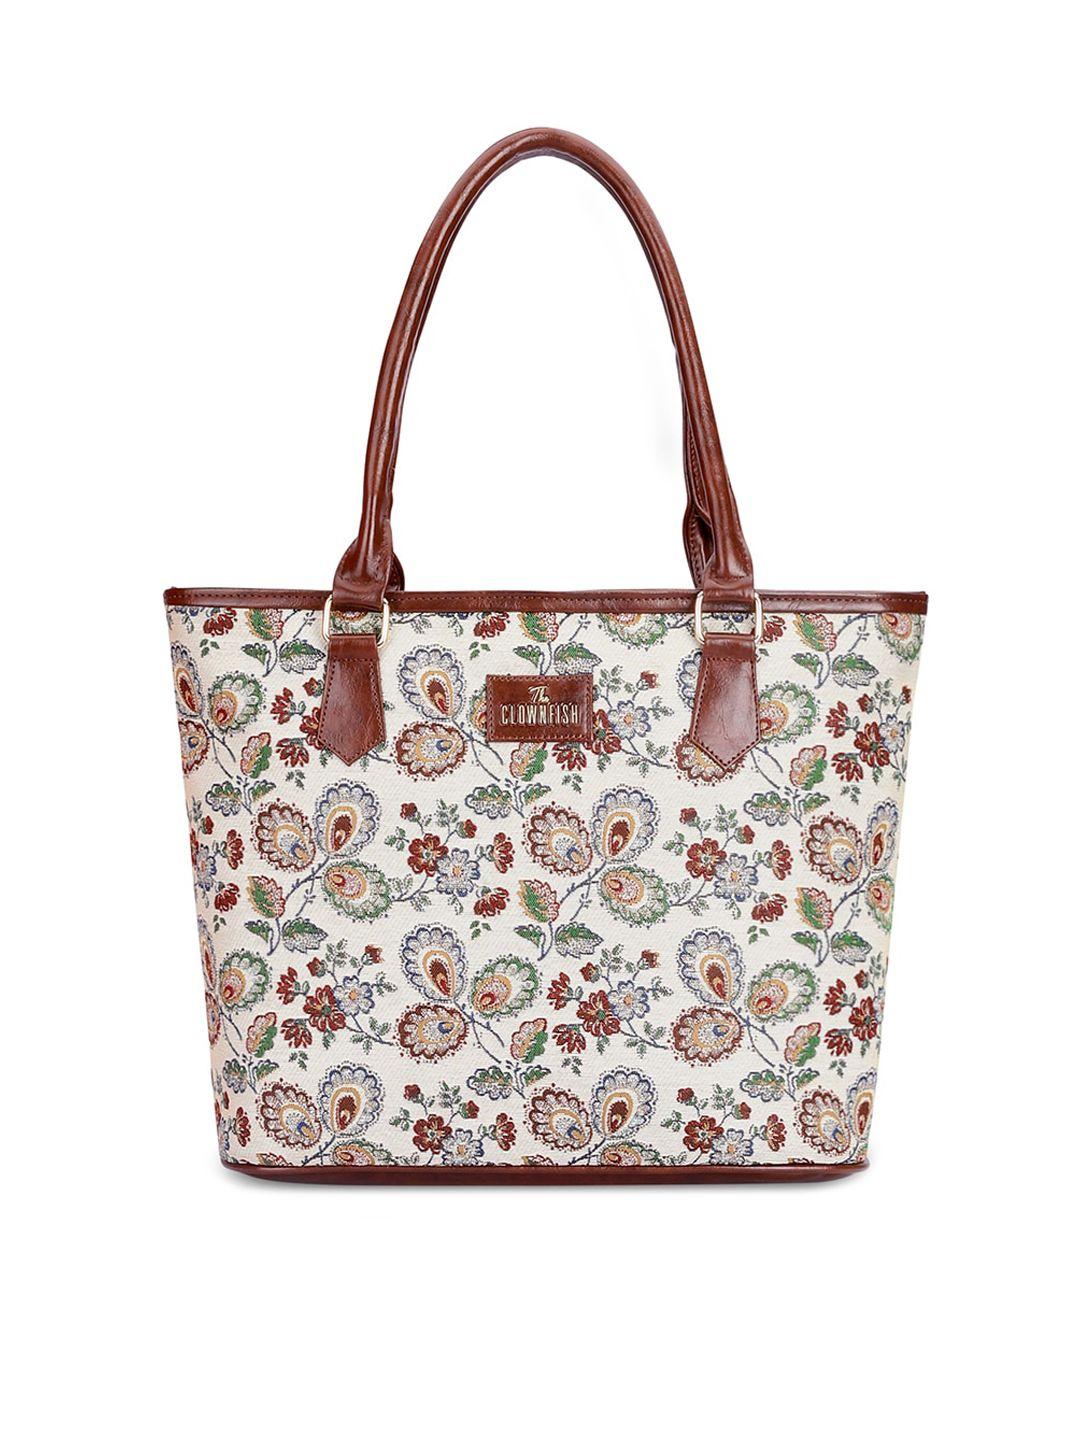 the-clownfish-floral-printed-structured-tote-bag